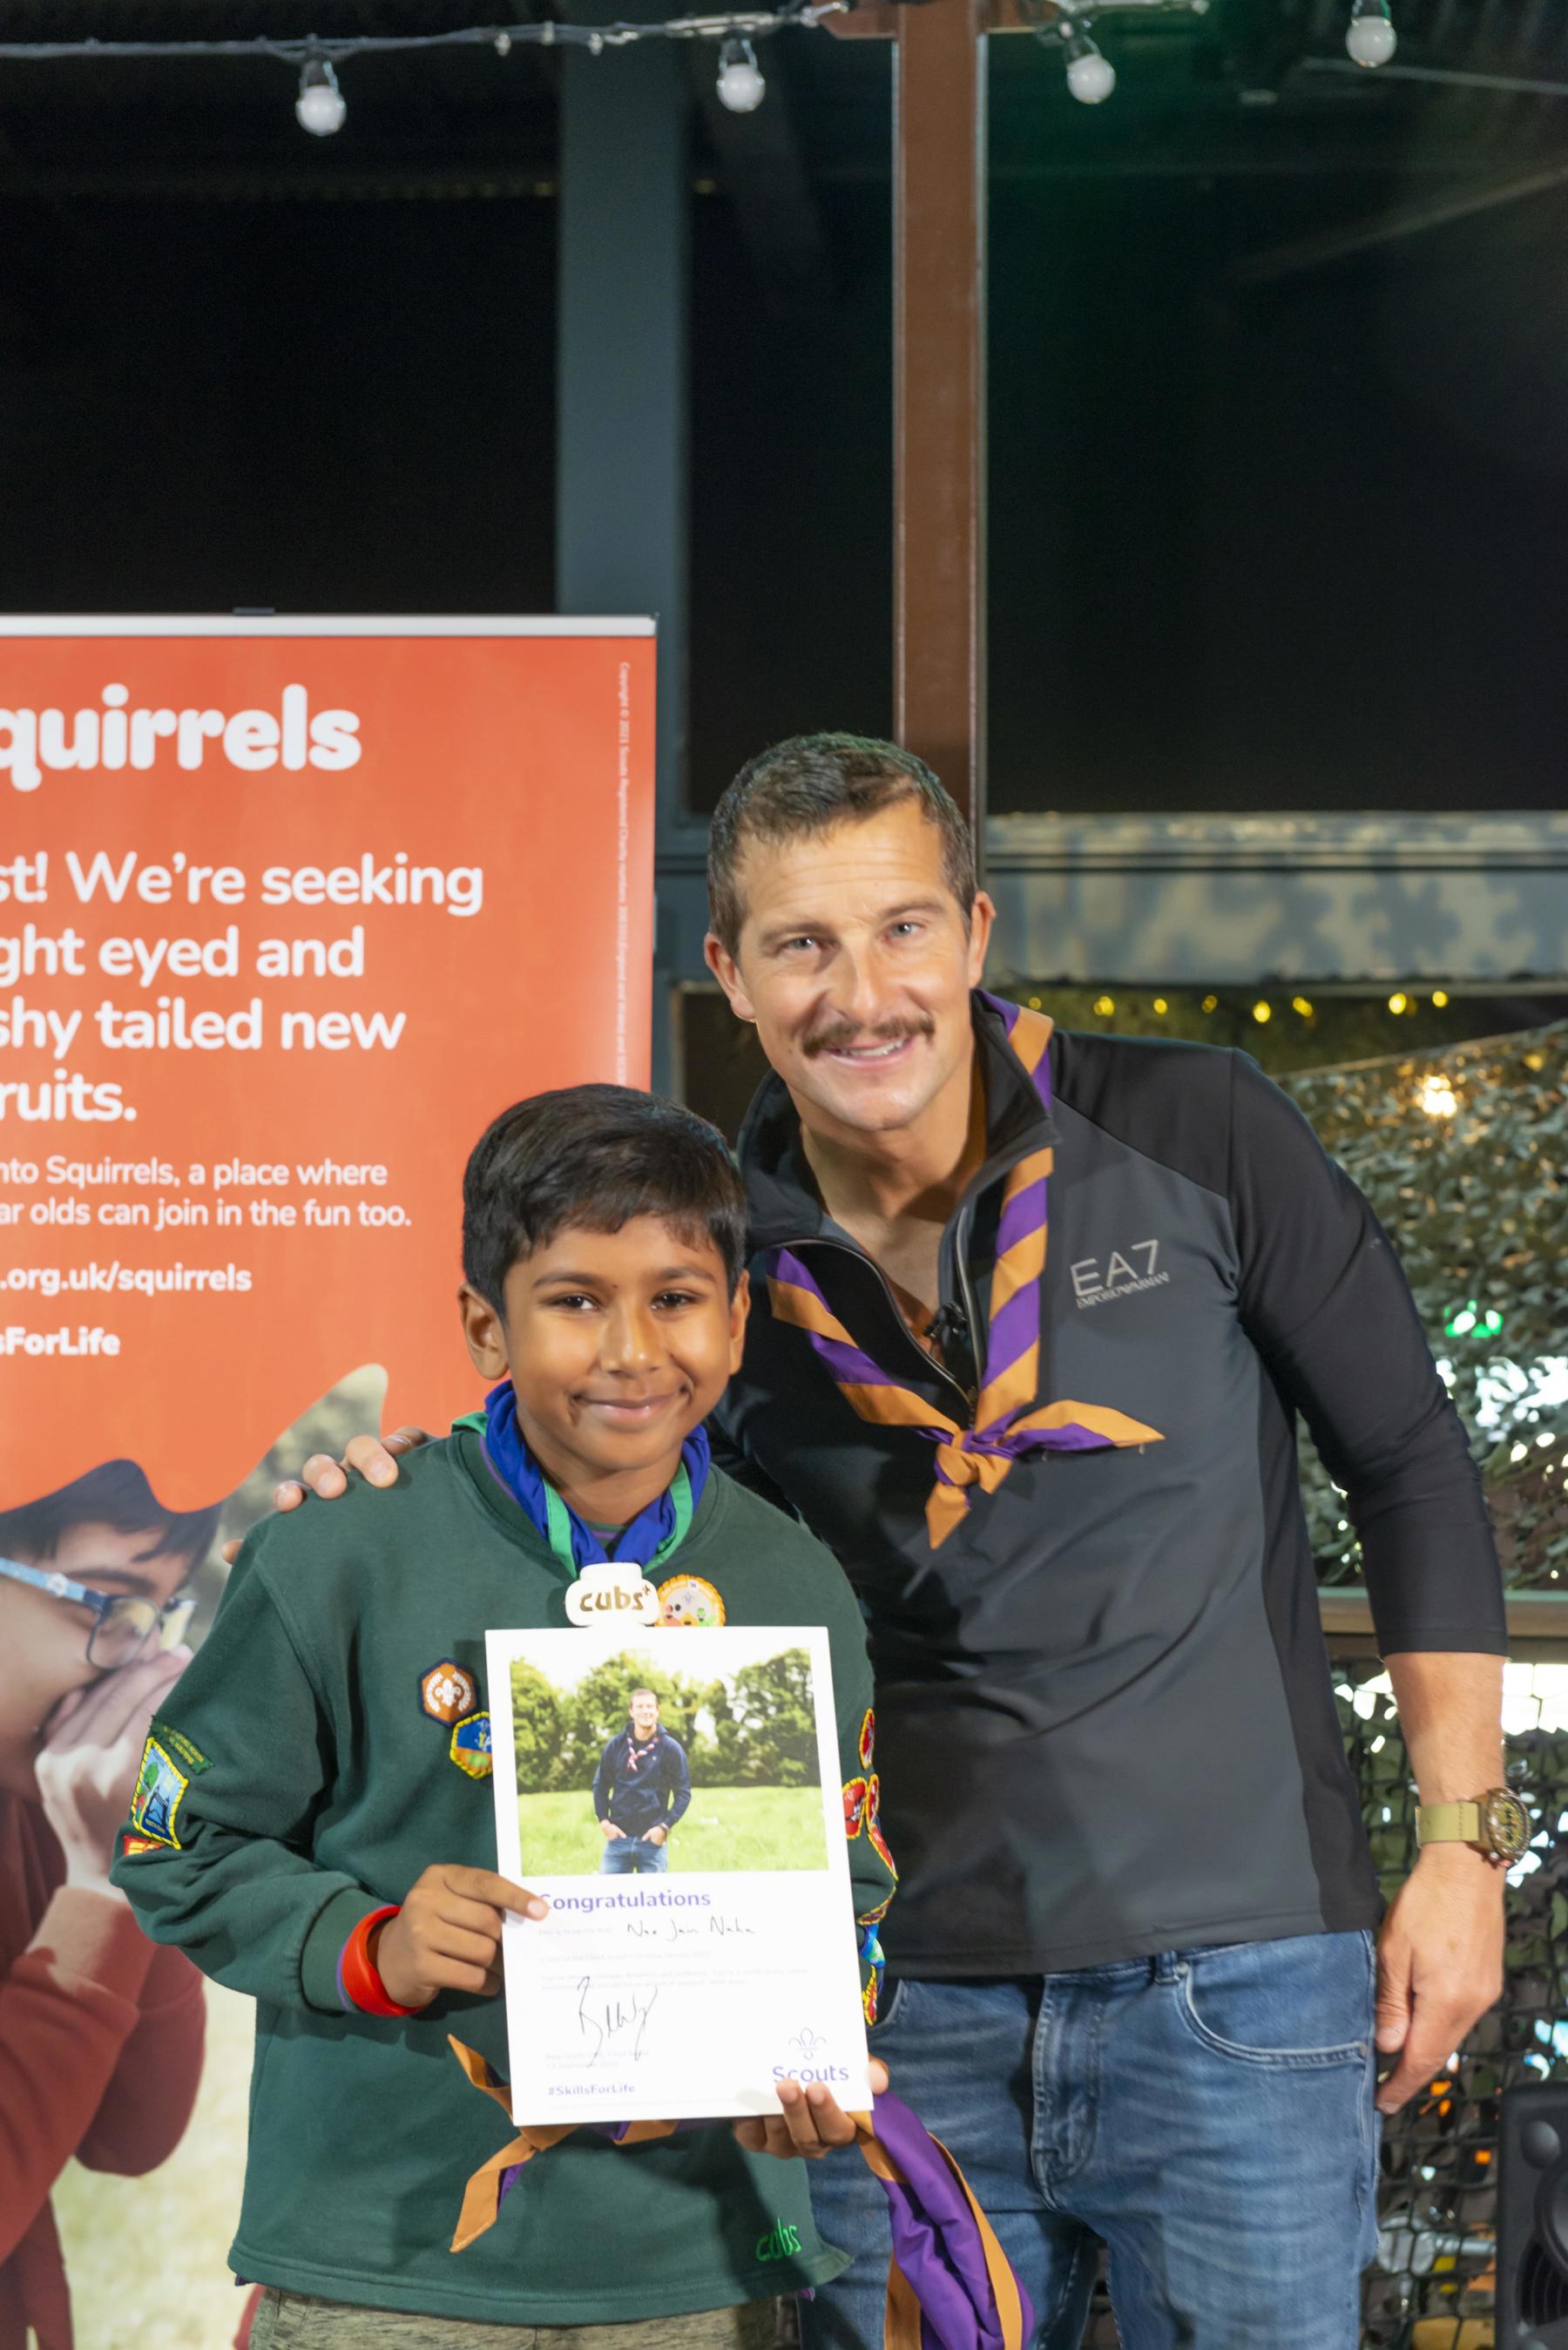 Neo is stood next to Bear Grylls and holding his Unsung Heroes certificate. They're both smiling. Bear is wearing a necker. Neo is wearing his Cubs uniform.